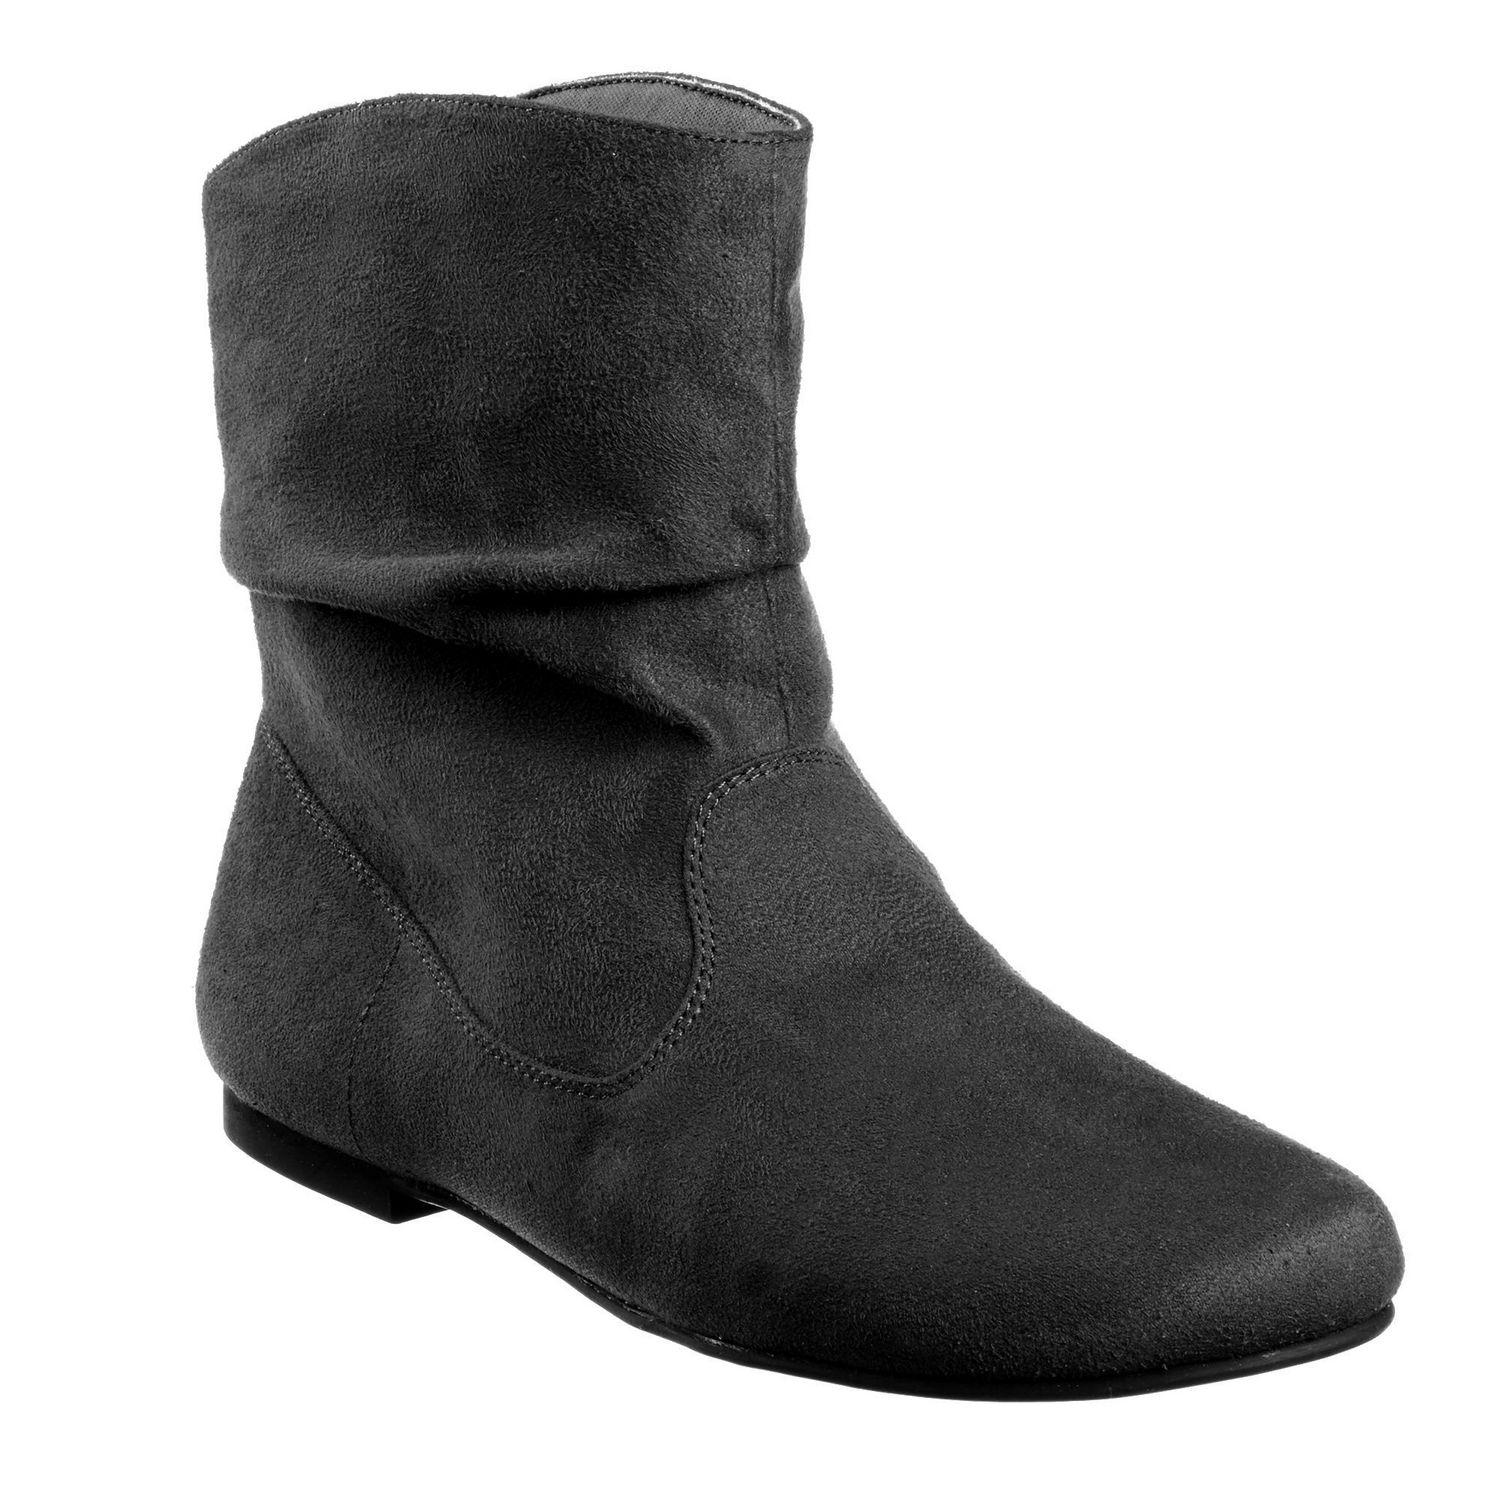 George Women's Fab Slouch Boots | Walmart Canada